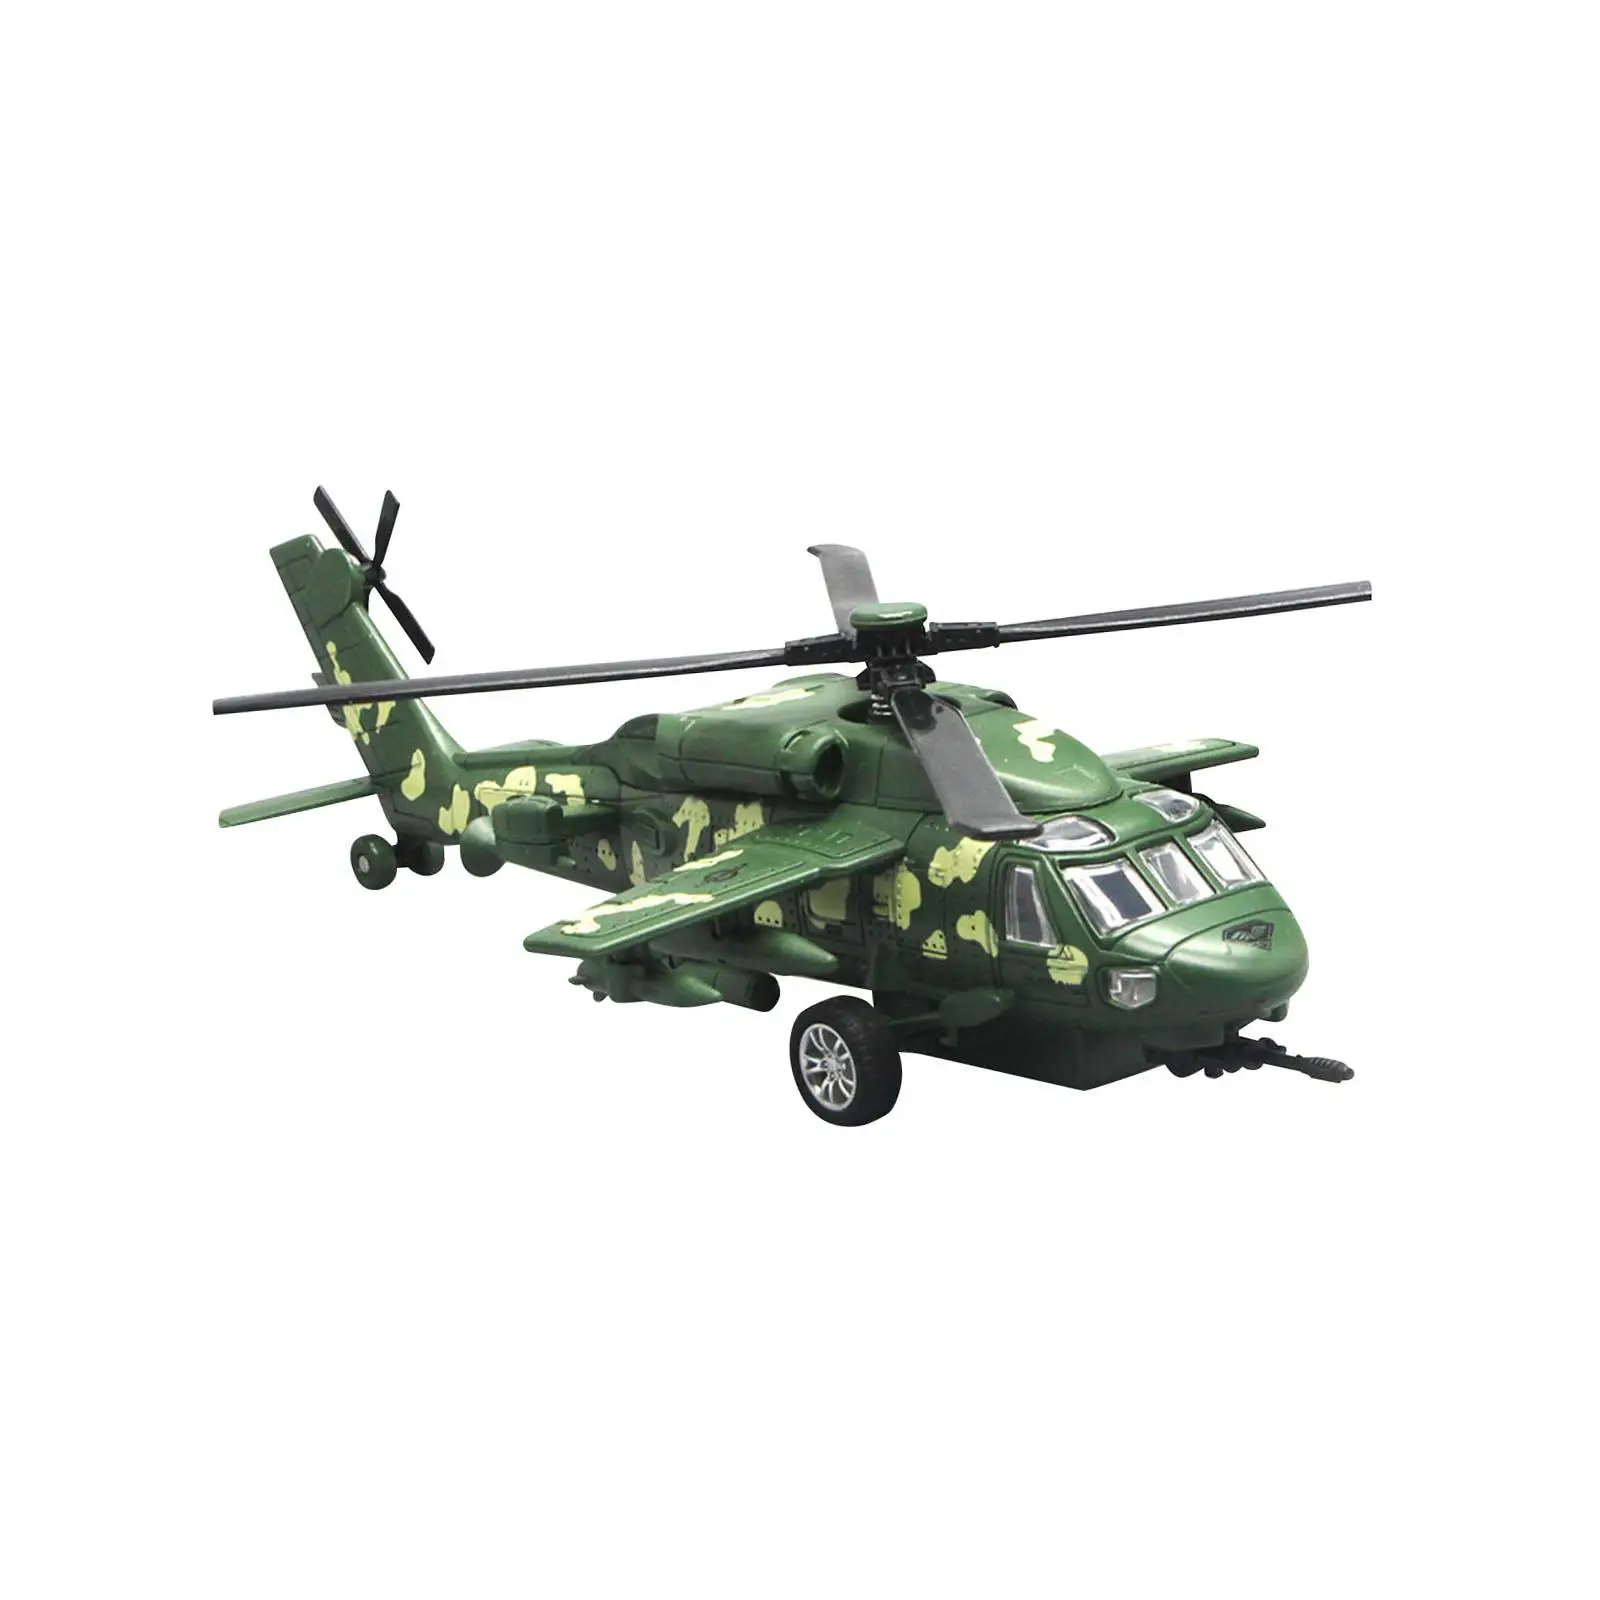 Diecast Helicopter Pull Back Aircraft Ornament Miniature Model with Lights and Sound Toy Holiday Gifts Keepsake Office Decor